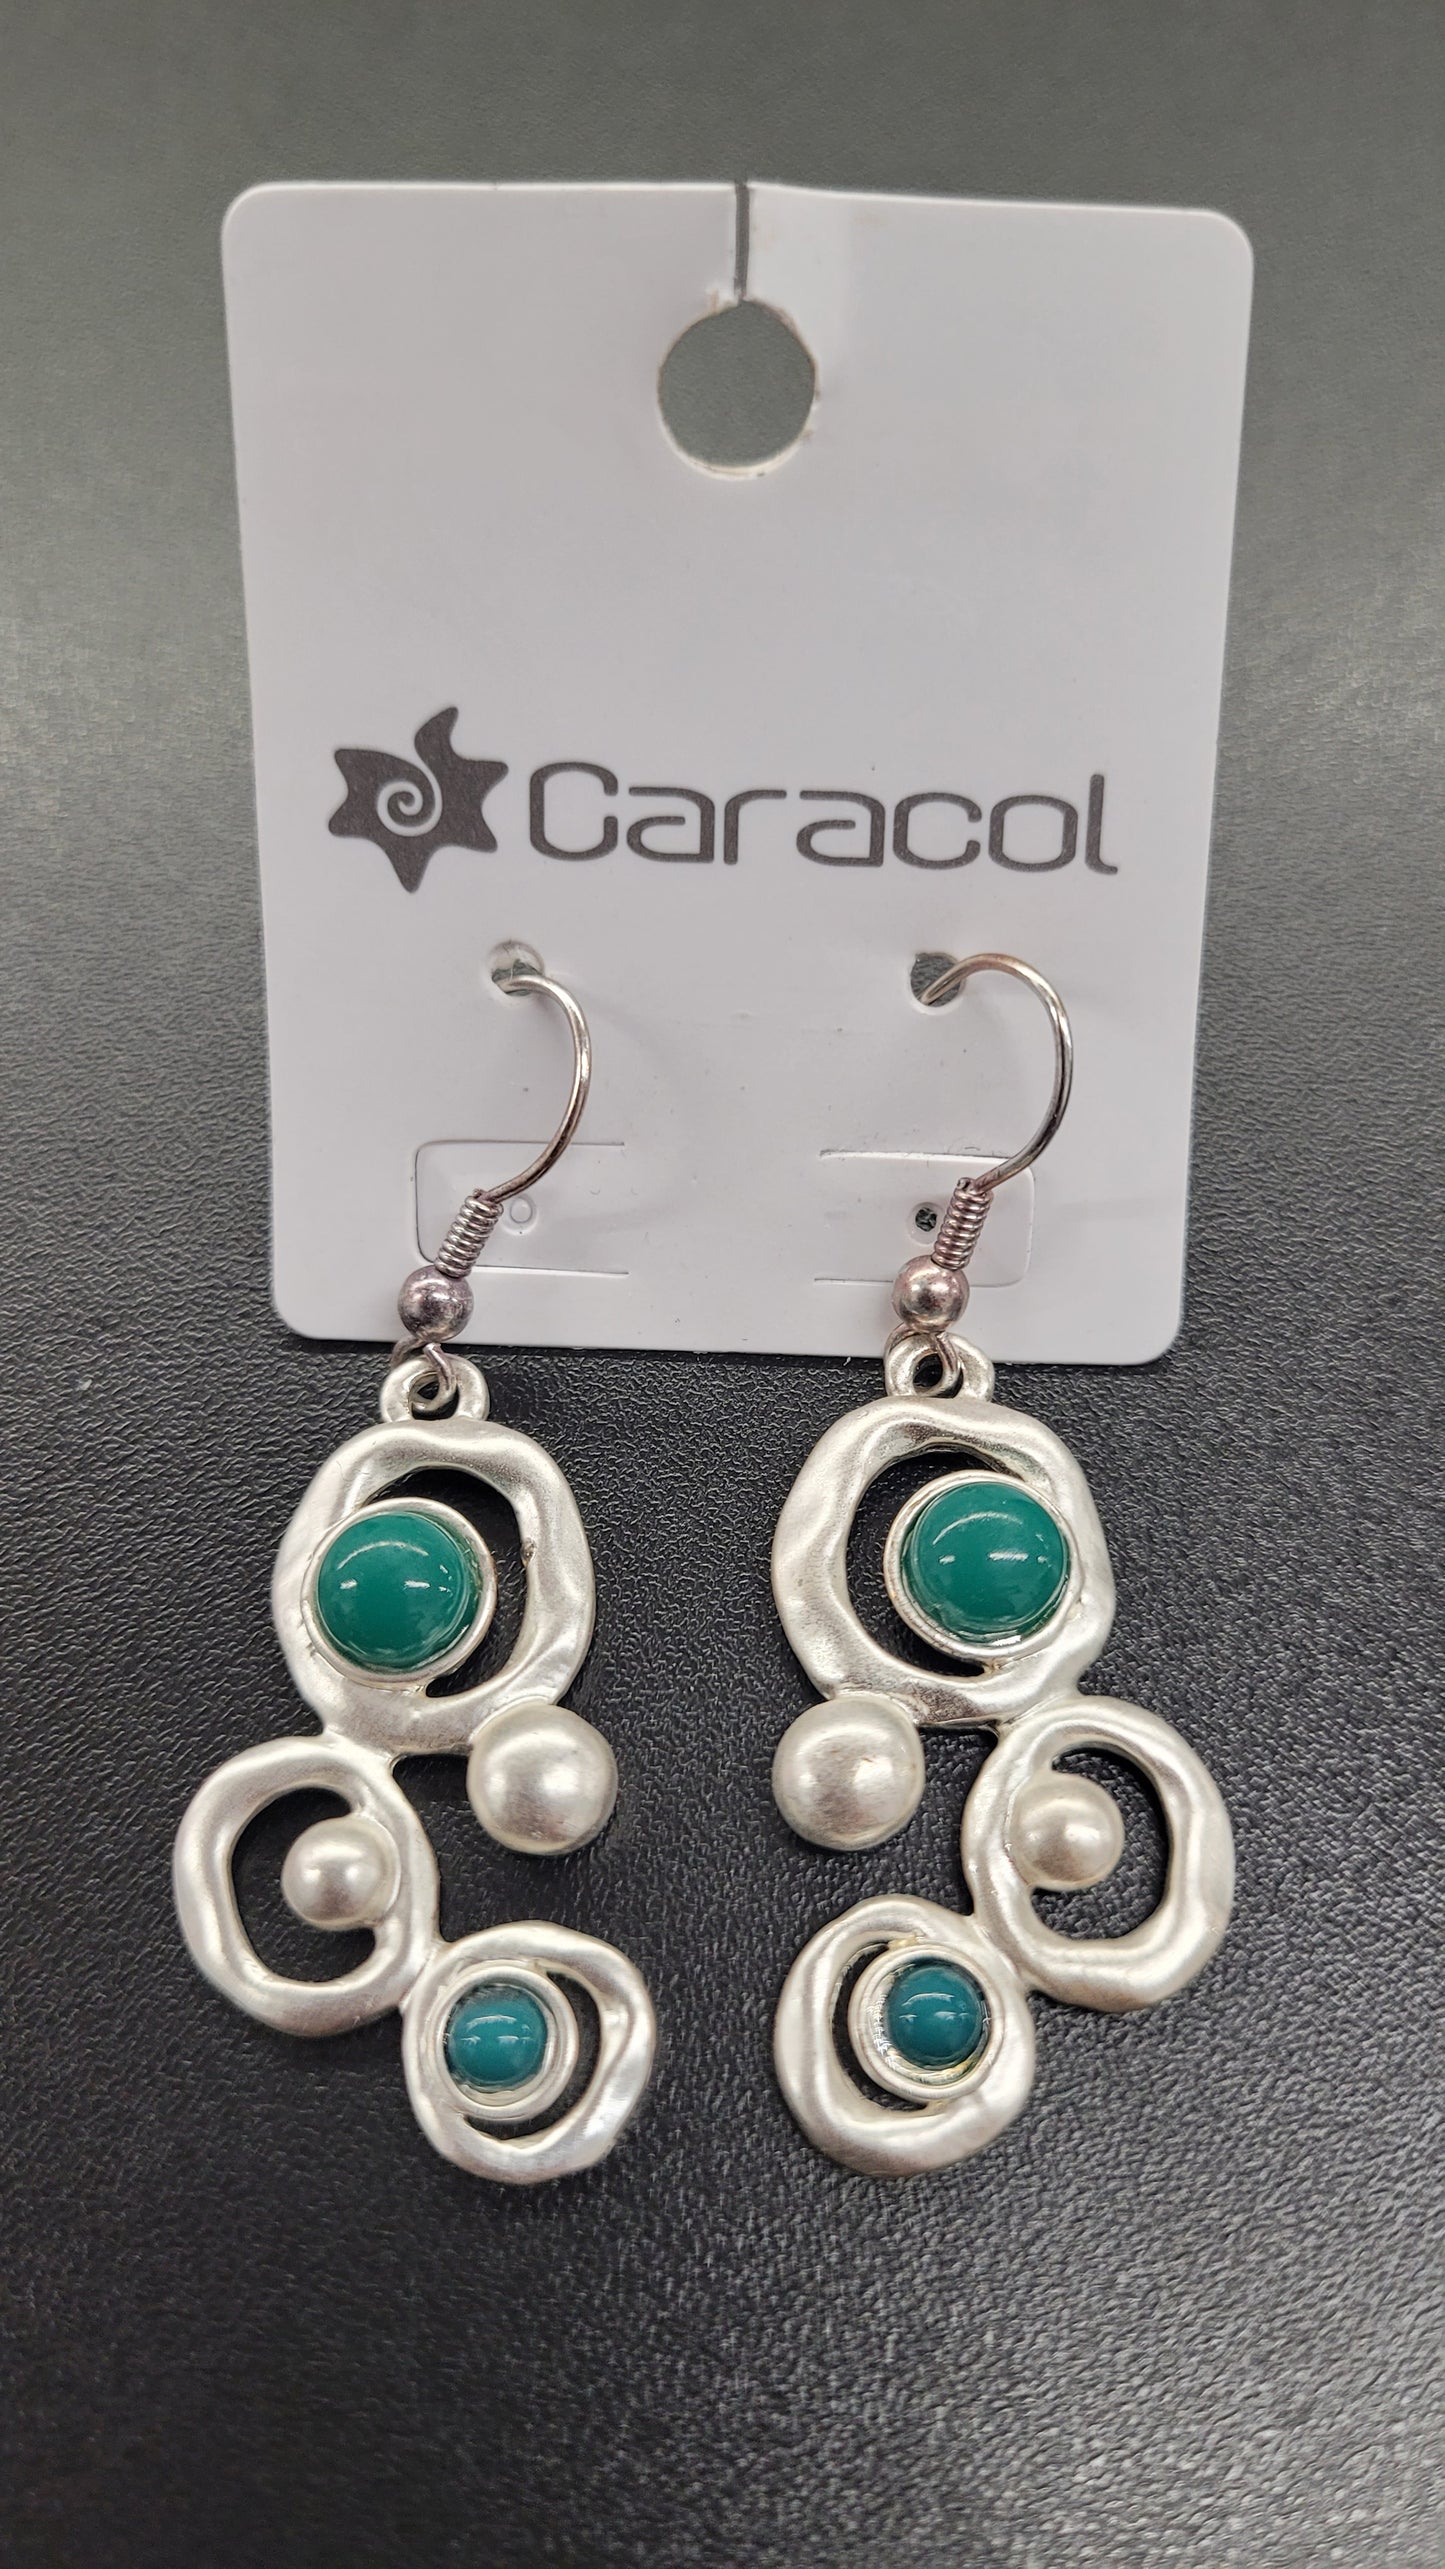 Caracol Drop Earrings Silver and Green